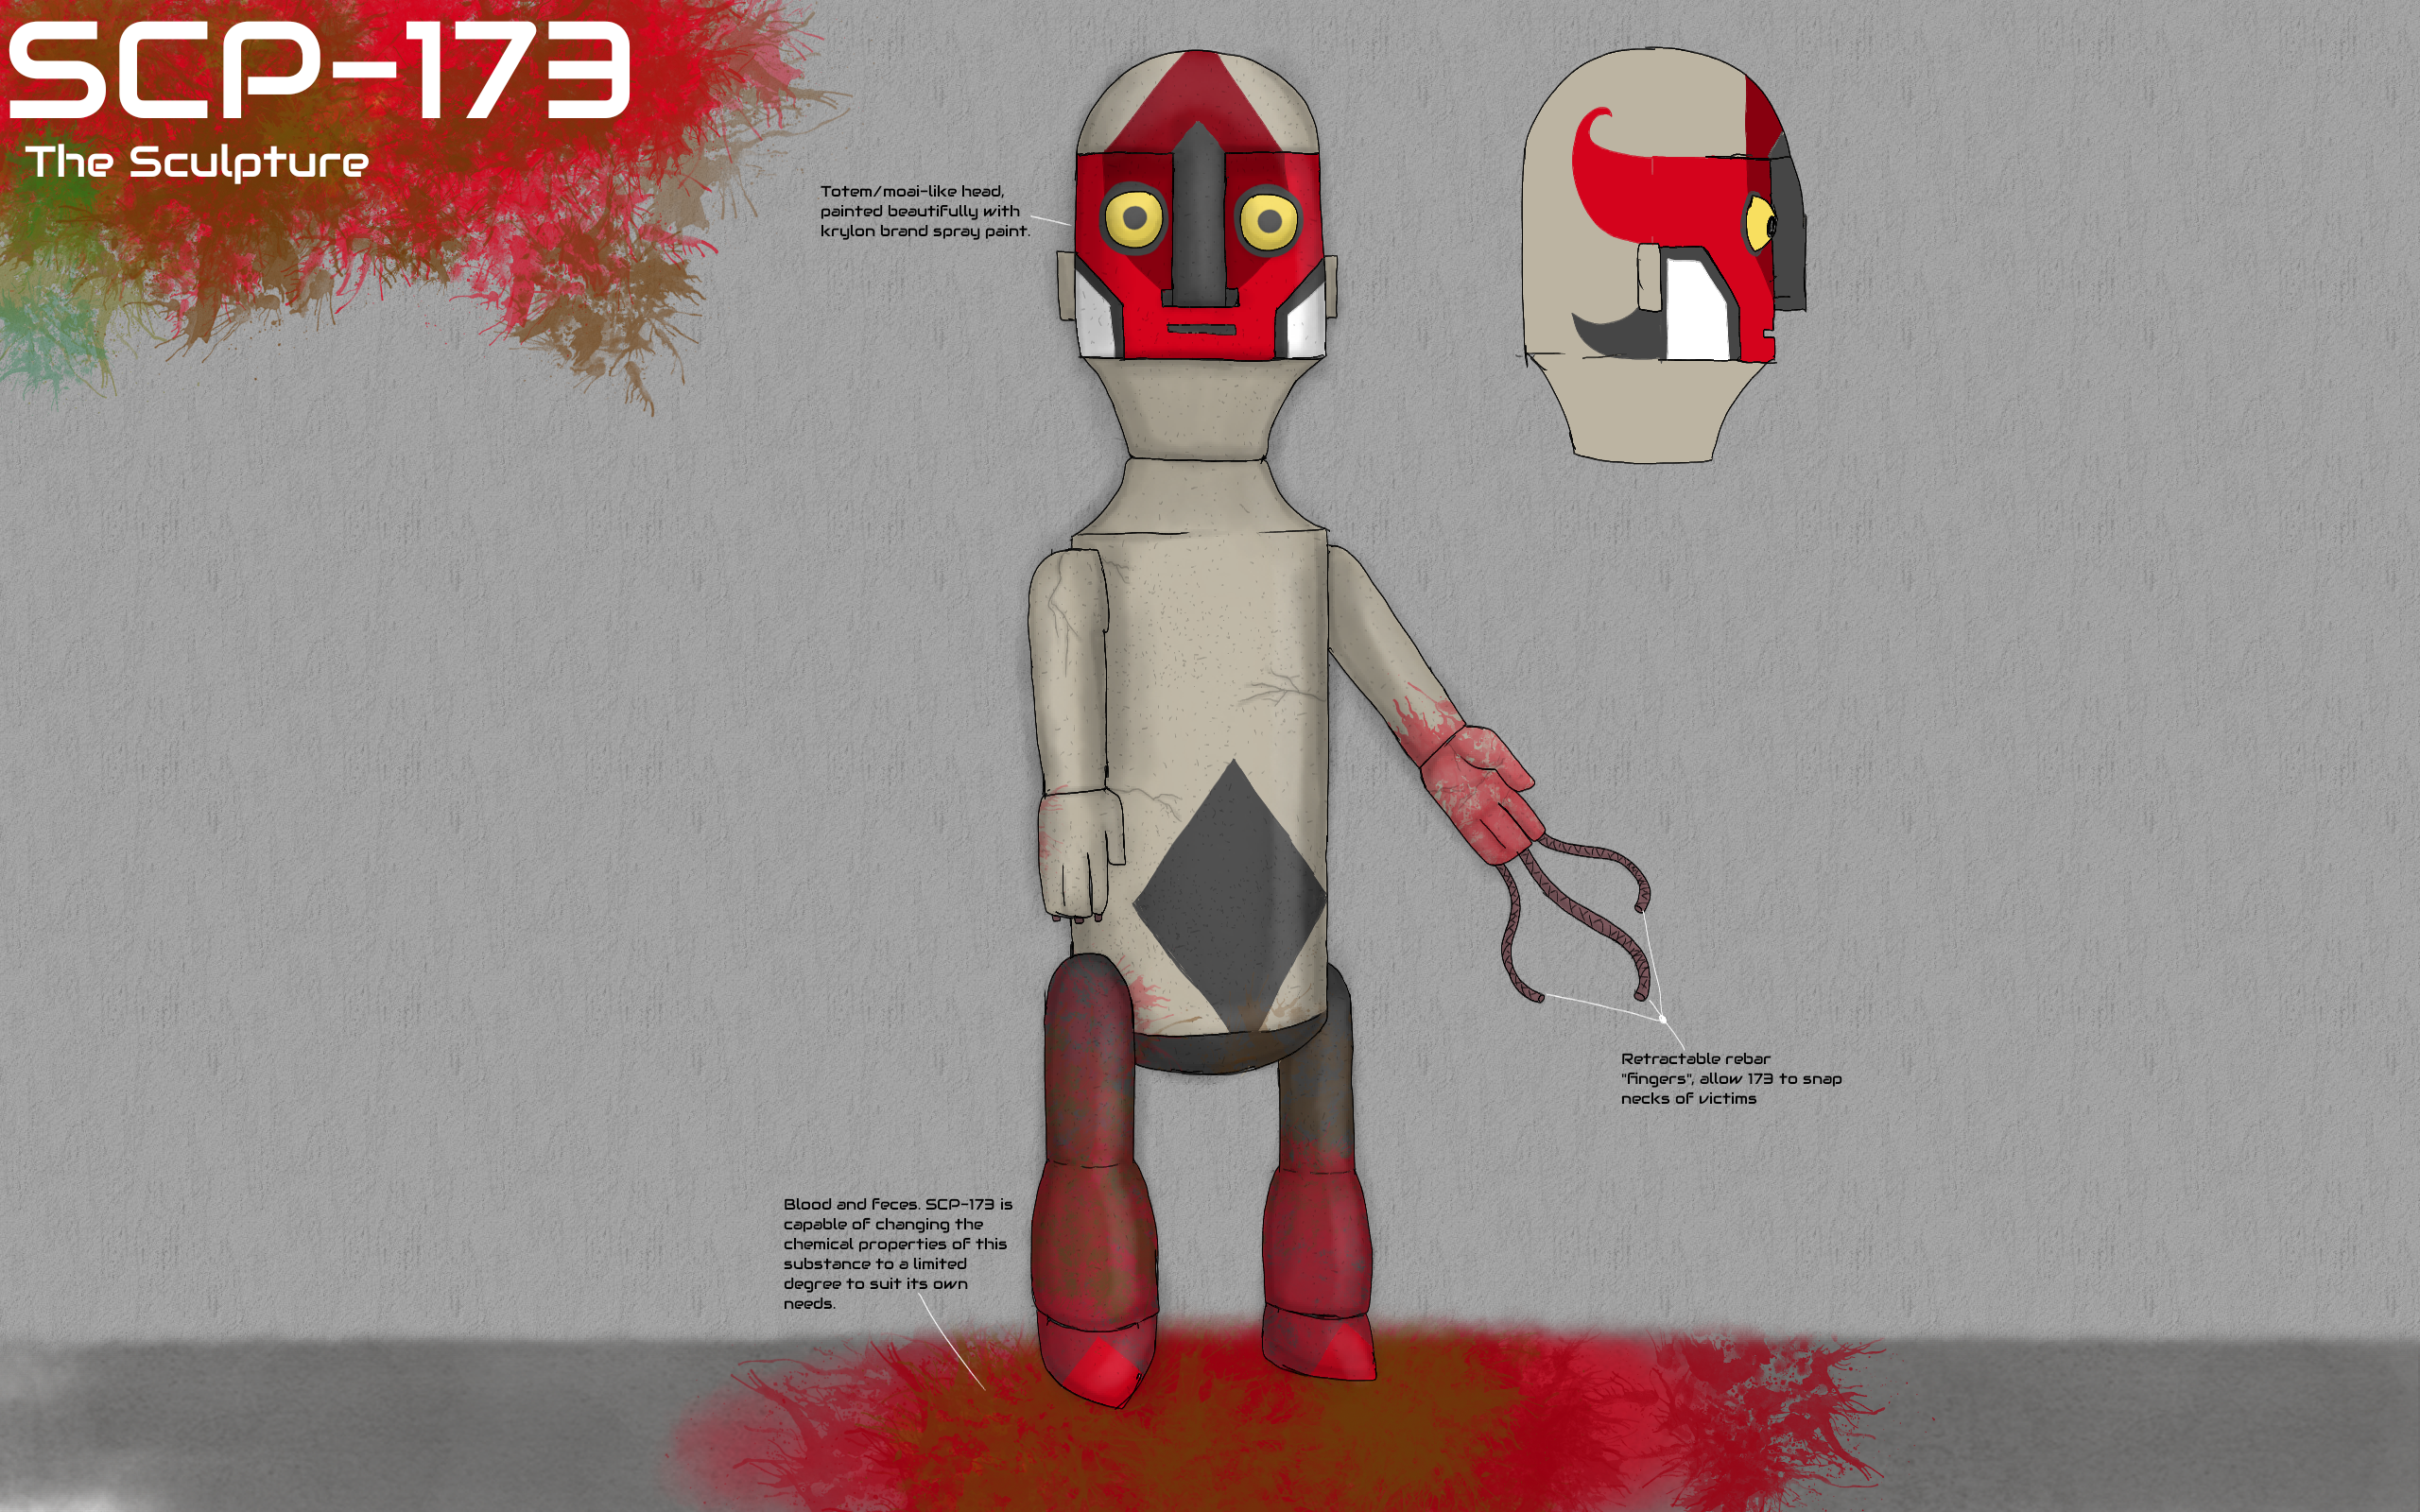 SCP - 173 Variant 7, Variant Codename : The Totem